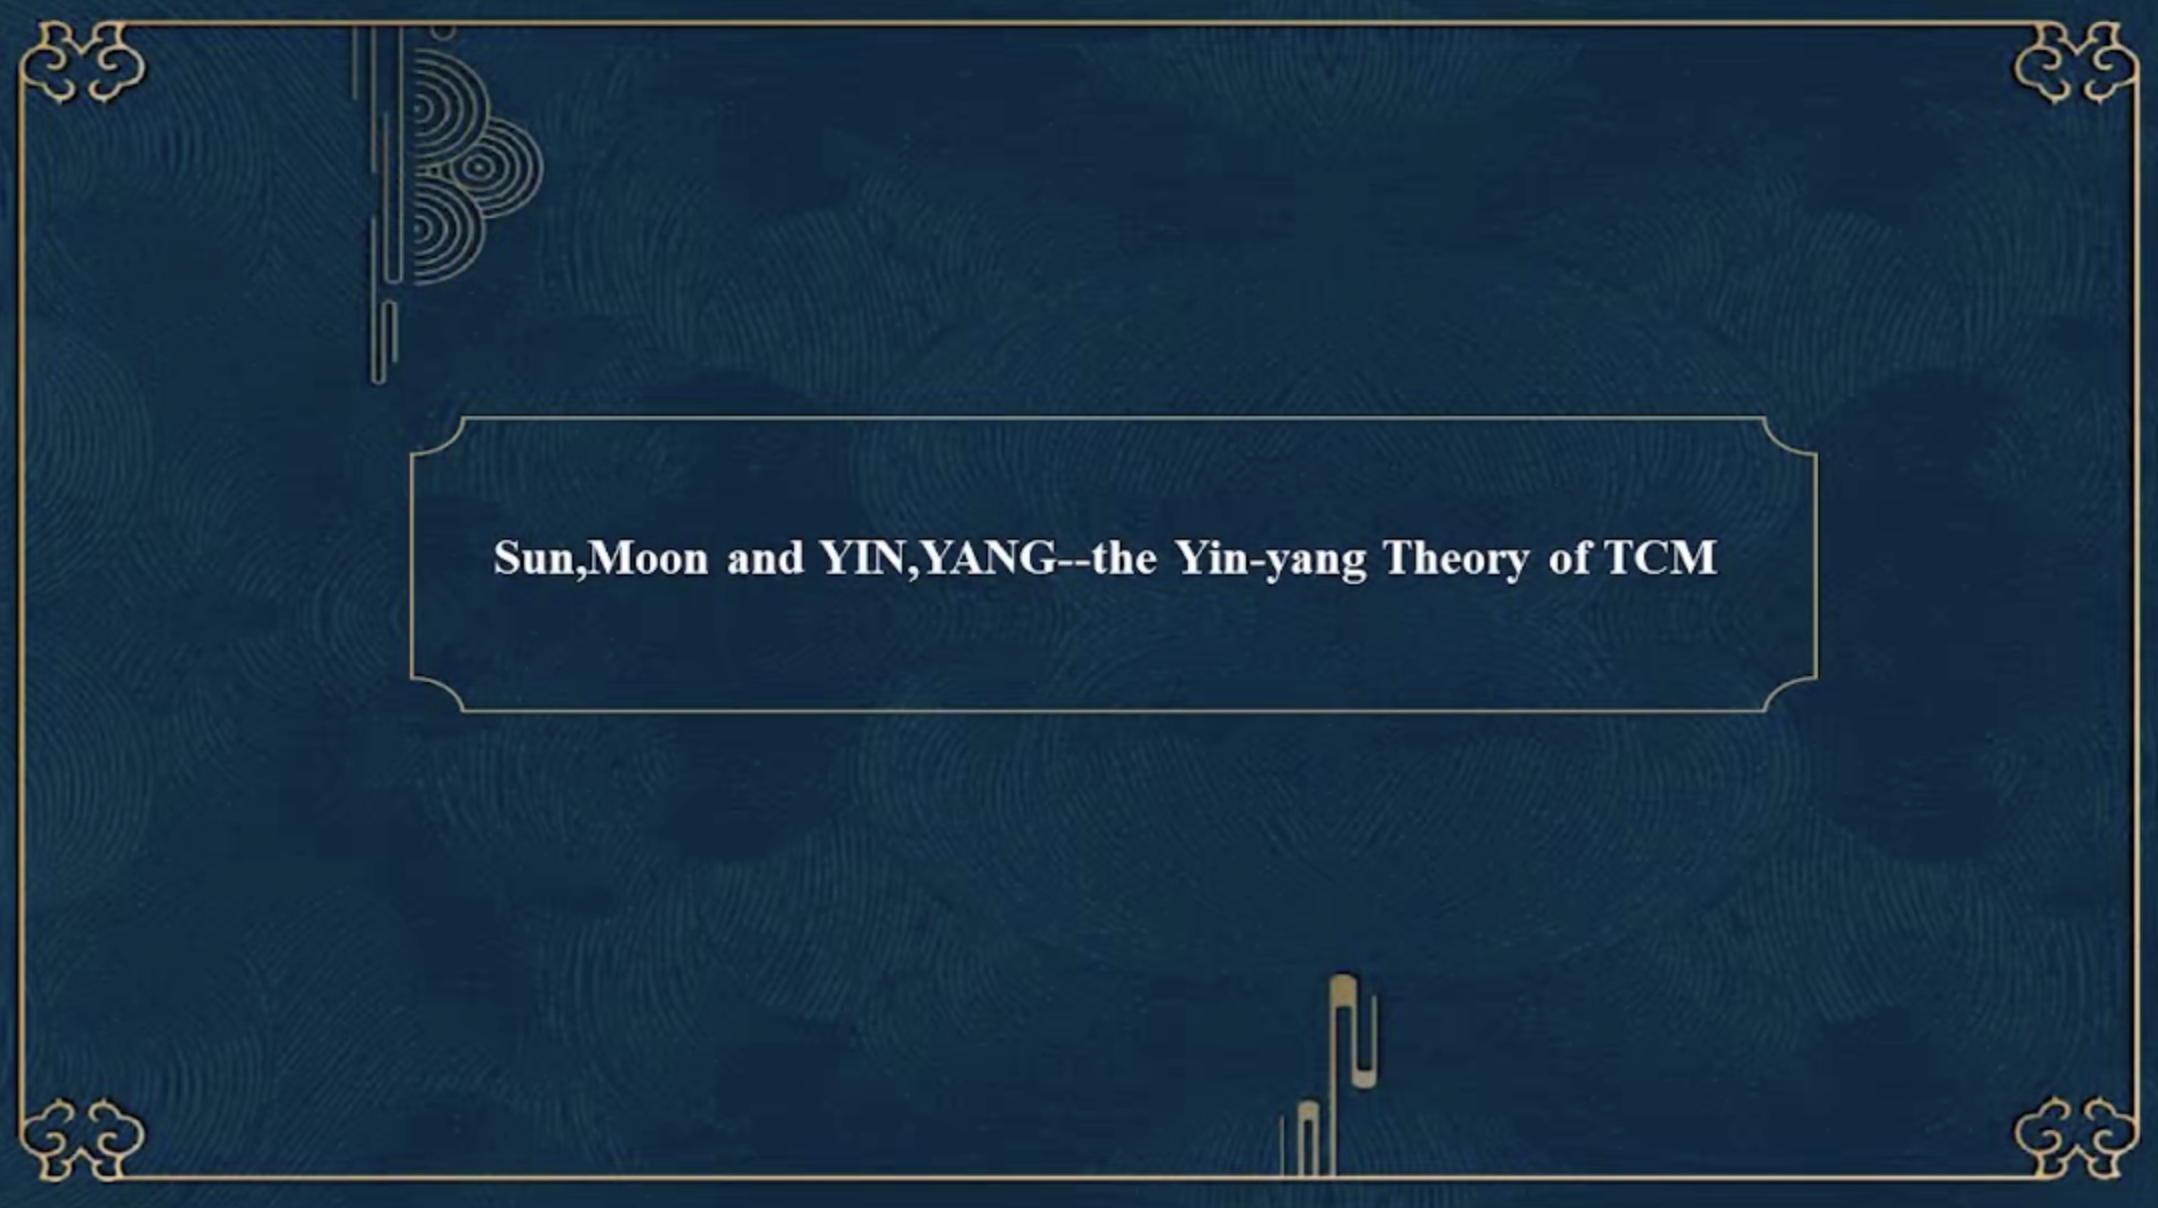 Wang lepeng+Basic theories of TCM--the Yin-Yang Theory and the Five-elements Theory